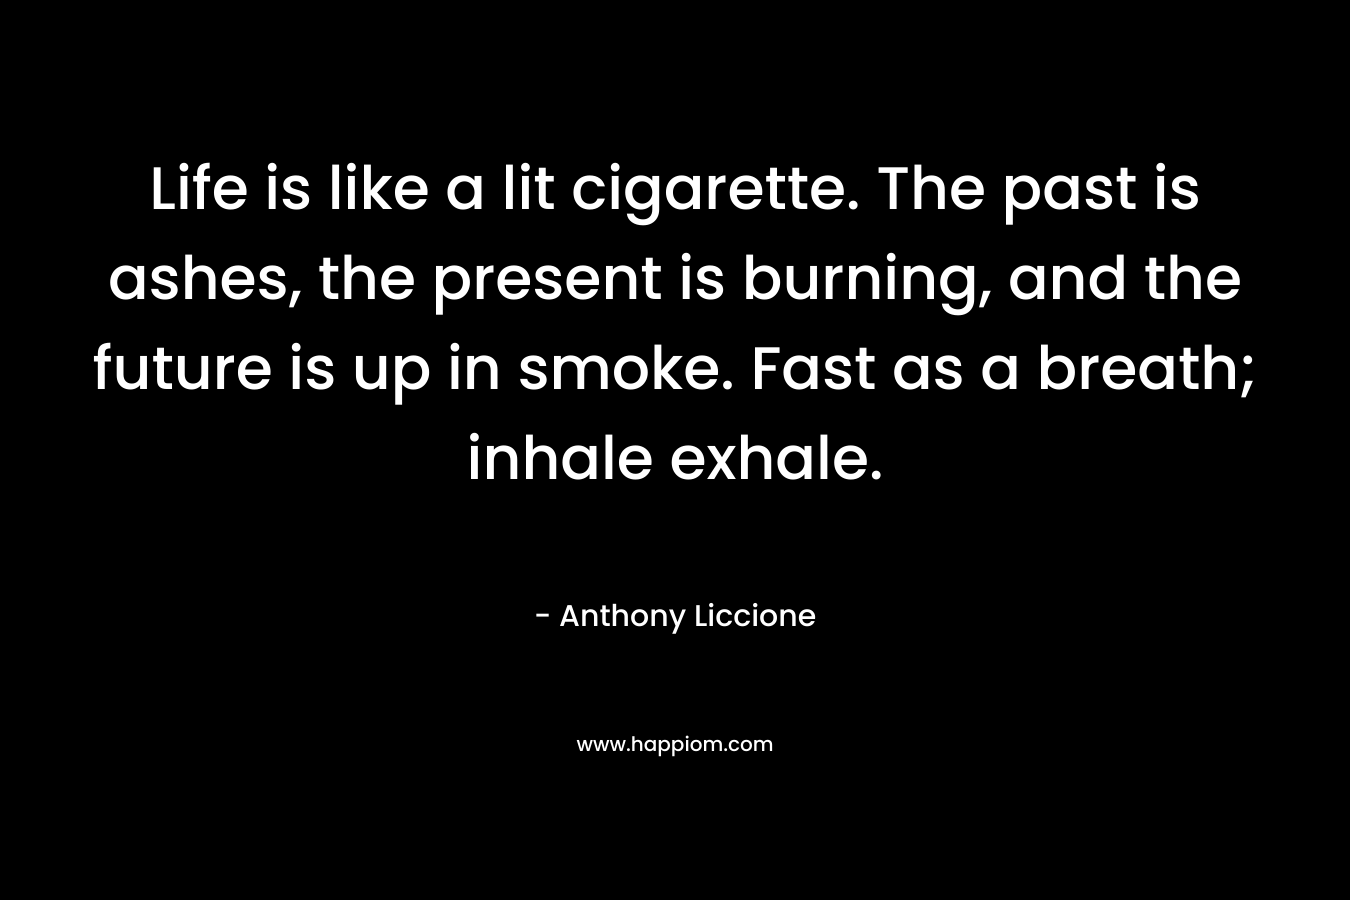 Life is like a lit cigarette. The past is ashes, the present is burning, and the future is up in smoke. Fast as a breath; inhale exhale.